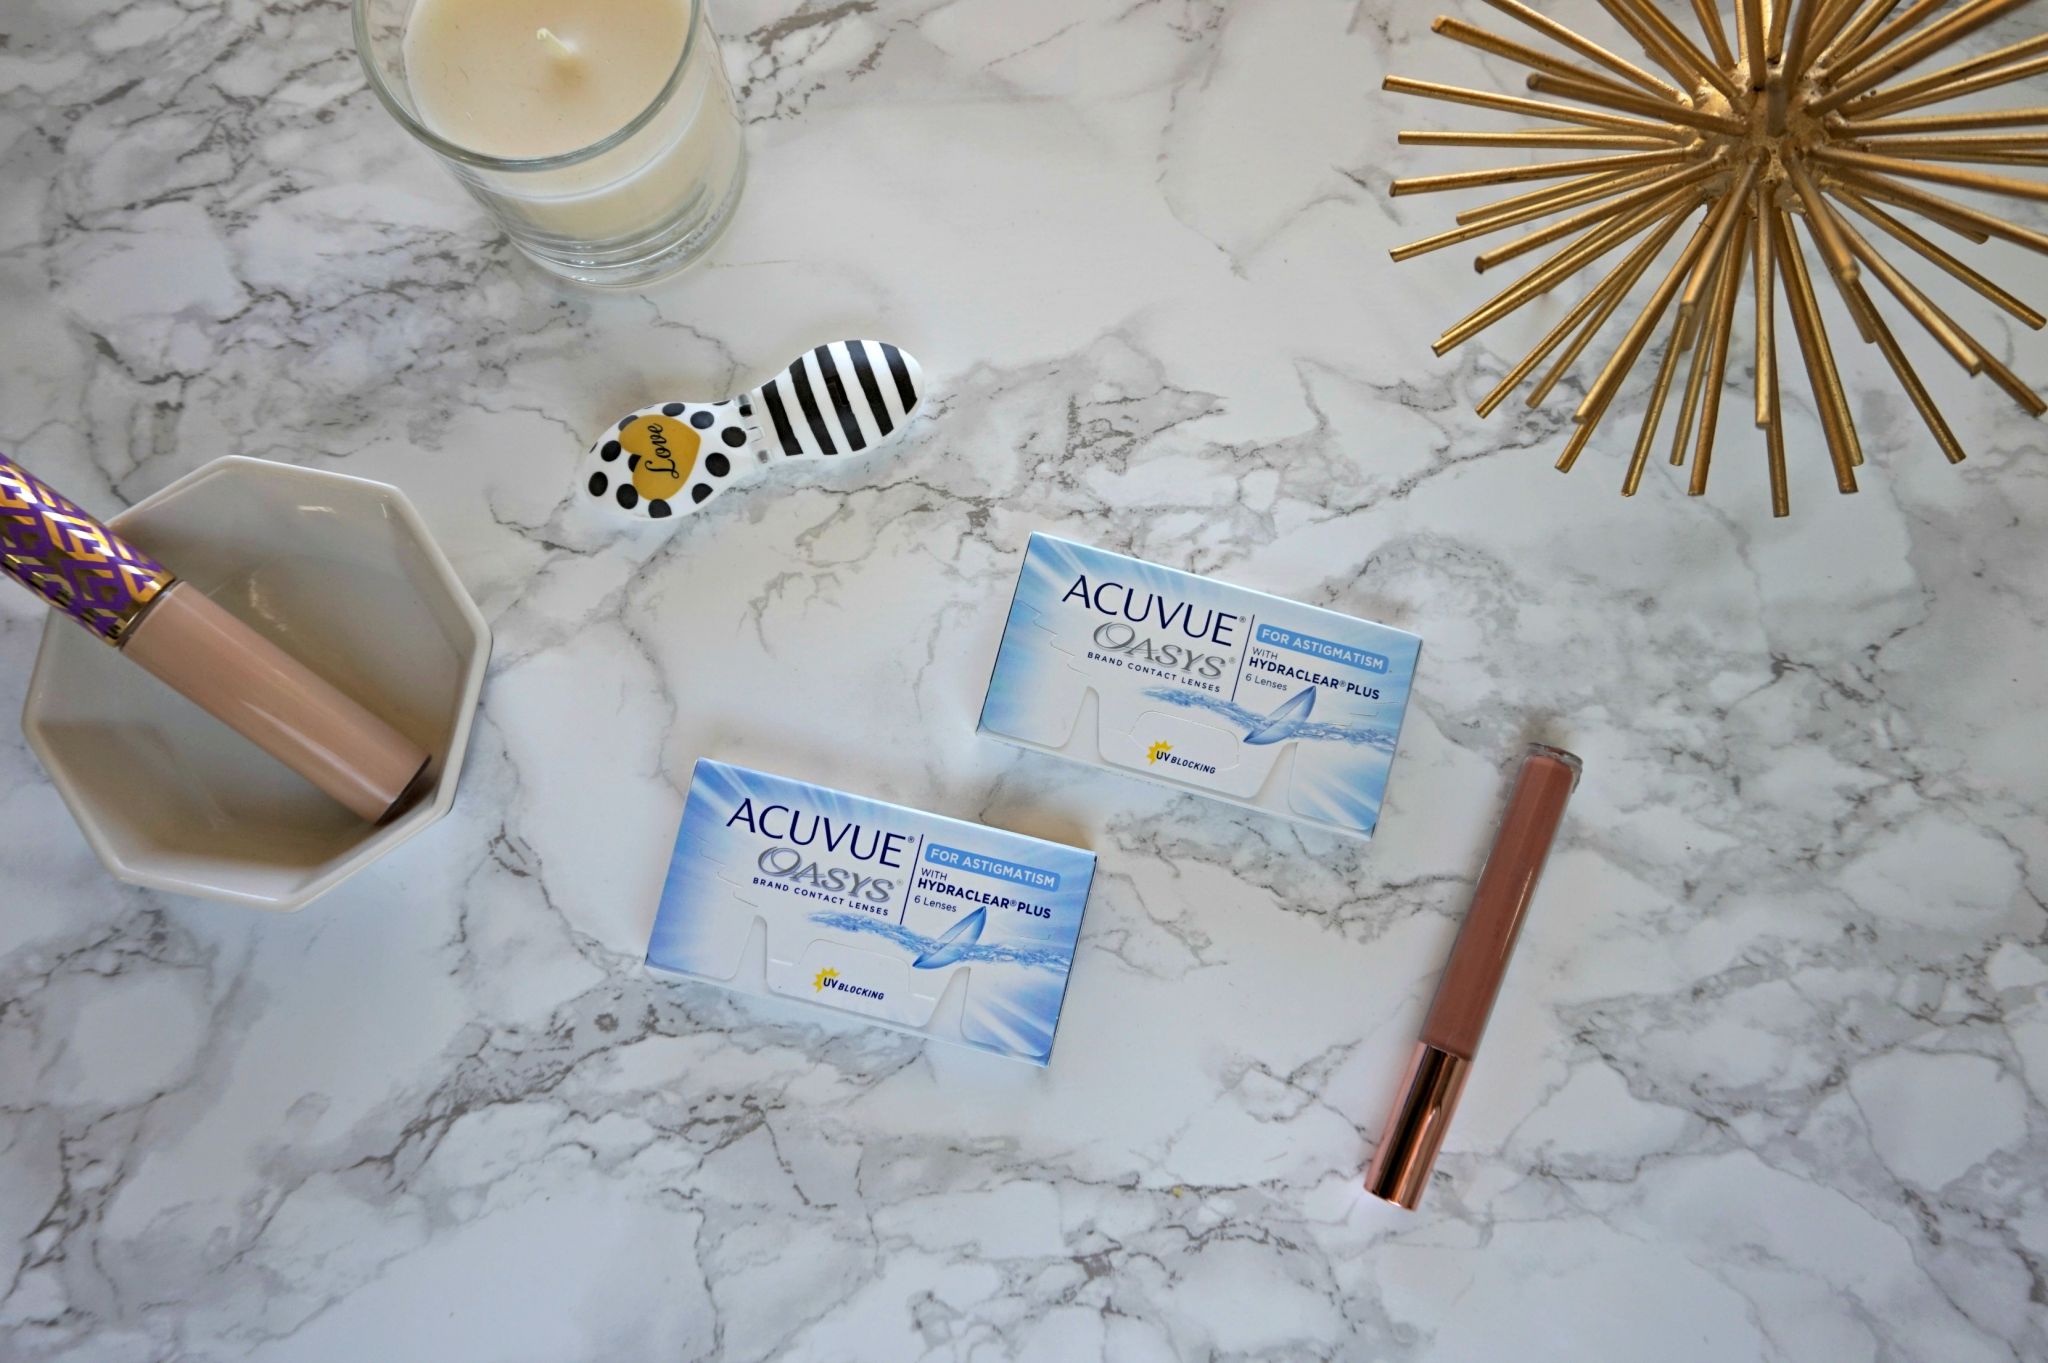 Easy Smoky Eyes with ACUVUE® Brand Contact Lenses & Target Optical® // #ad #TreatYourEyes | Beauty With Lily